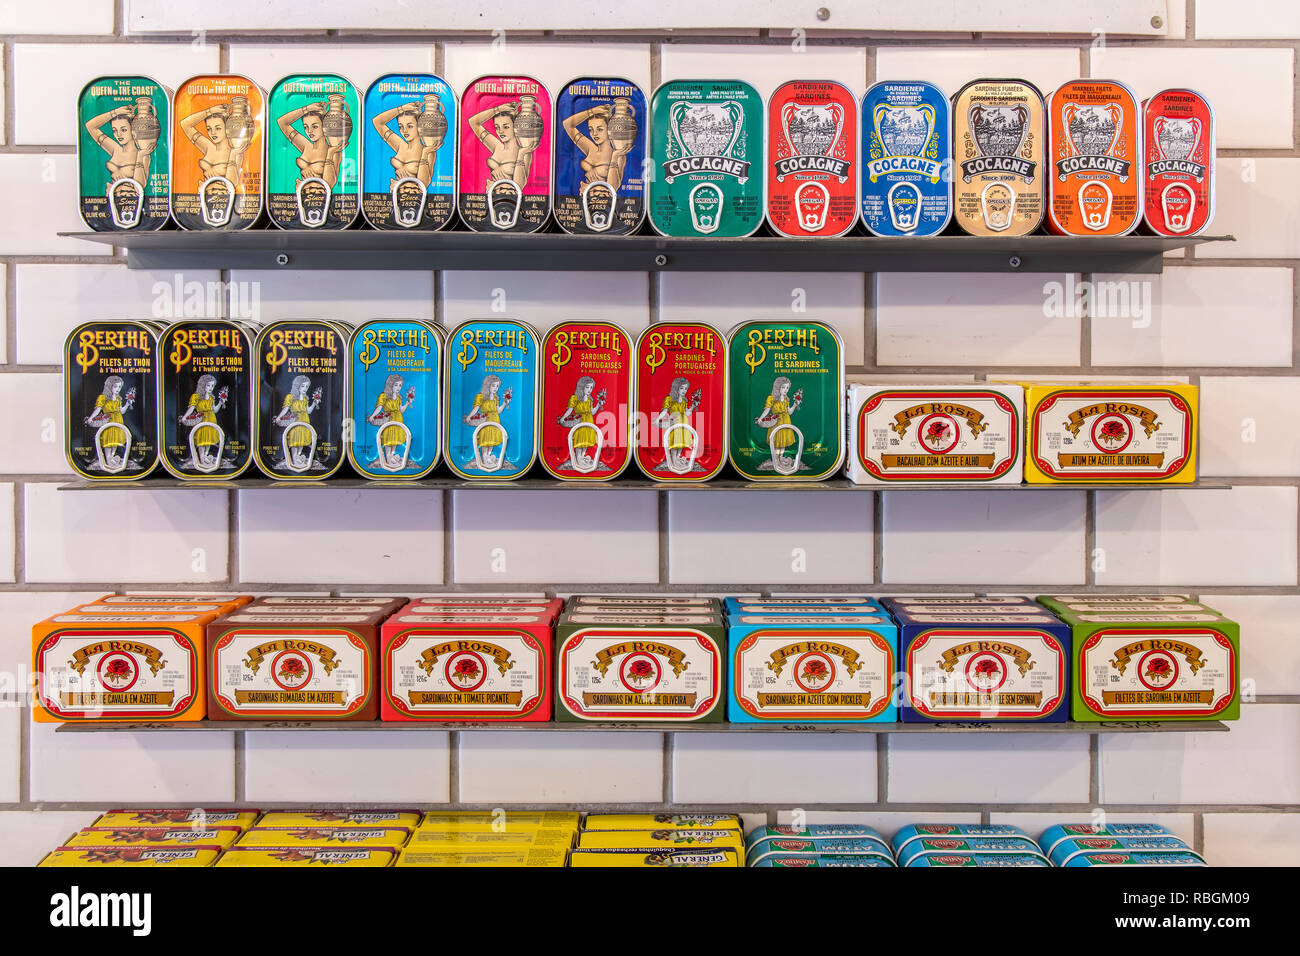 Traditional canned fish for sale at Conserveira de Lisboa shop, Lisbon, Portugal Stock Photo